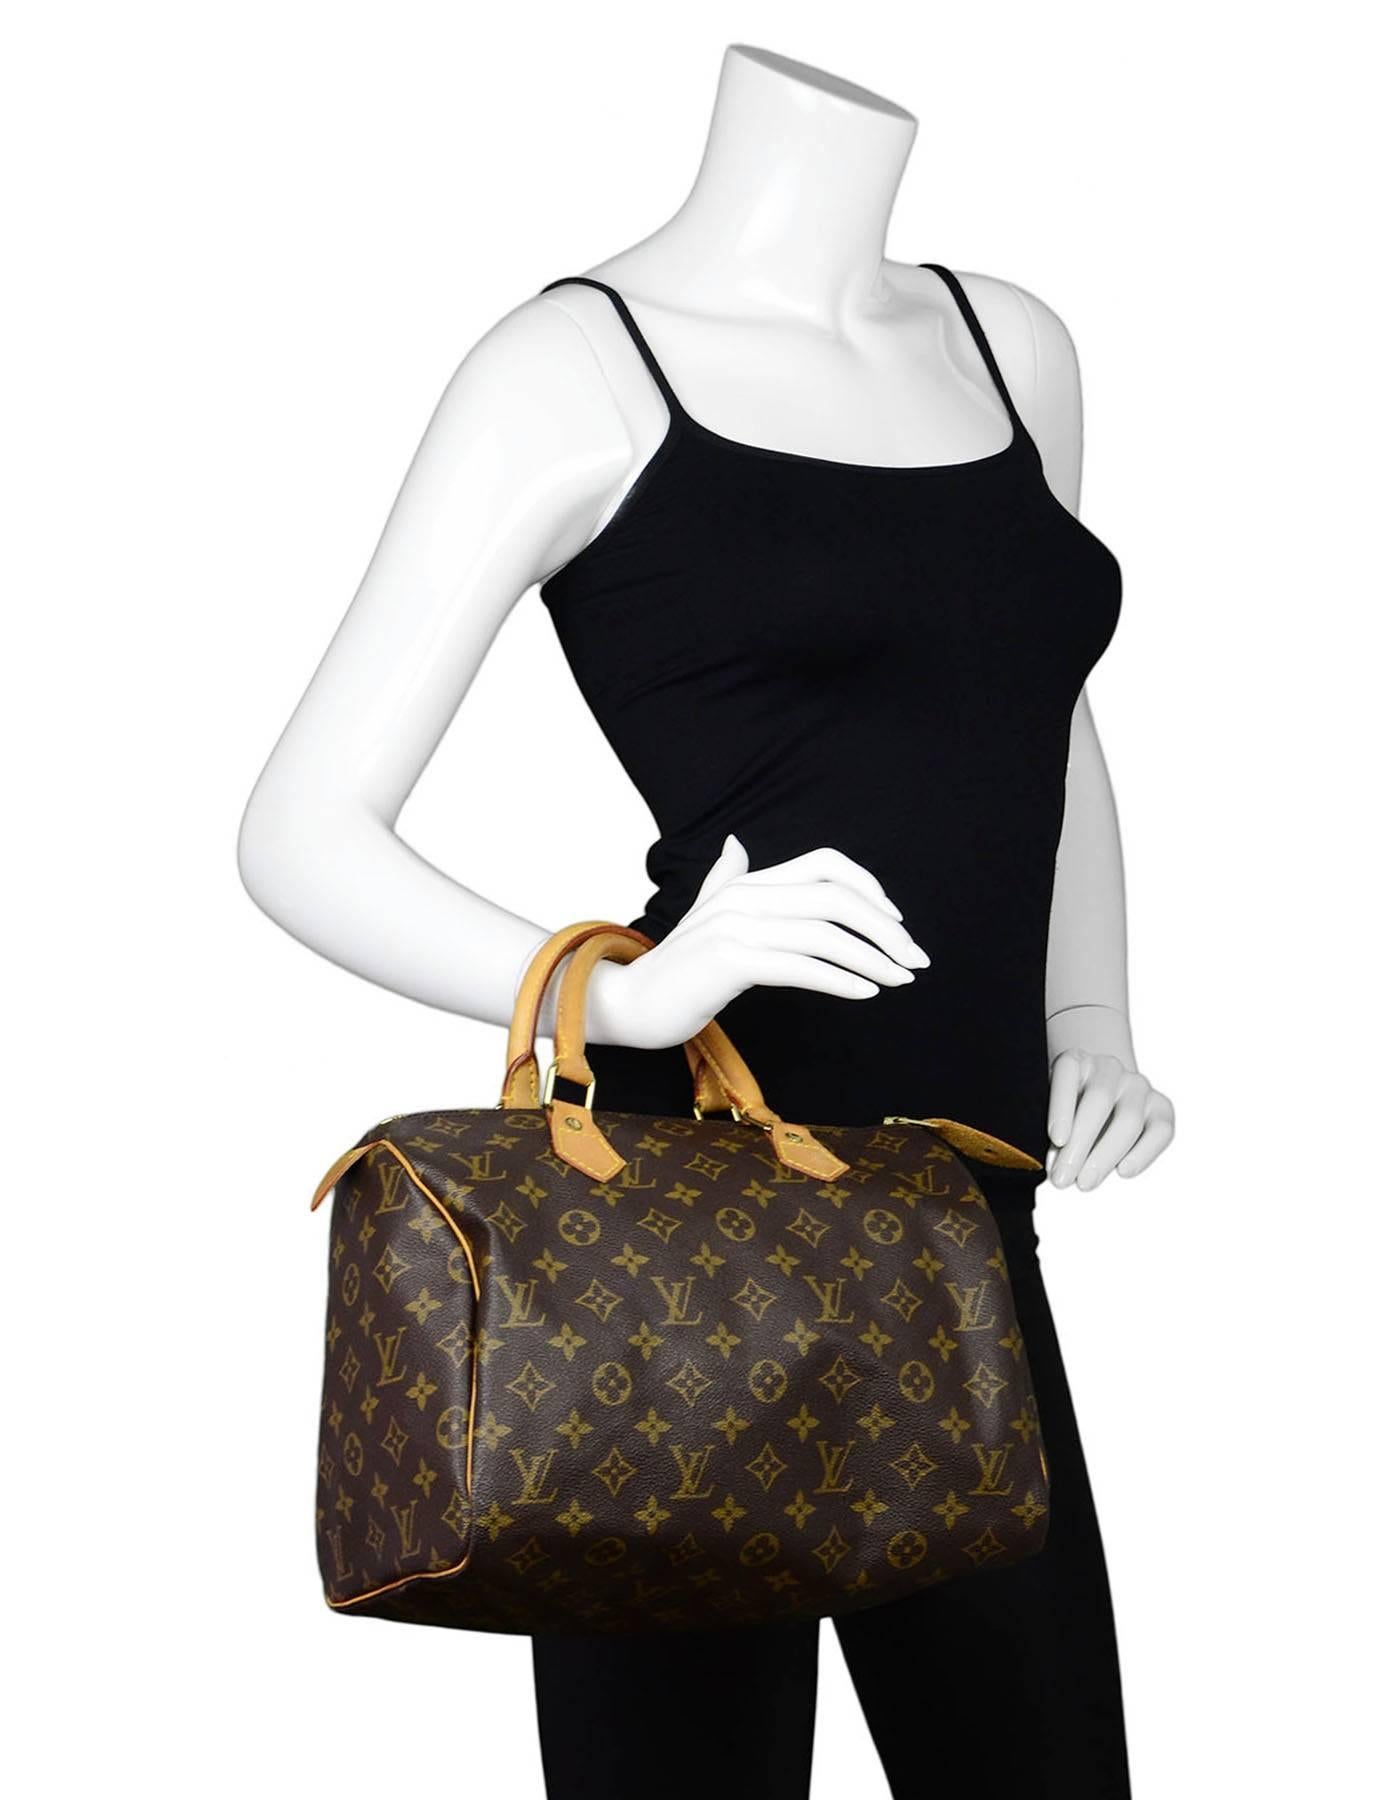 Louis Vuitton Vintage Monogram Speedy 30 Bag

Made In: USA
Year of Production: 1997
Color: Brown
Hardware: Goldtone
Materials: Leather and coated canvas
Lining: Brown canvas
Closure/Opening: Zip across top
Exterior Pockets: None
Interior Pockets: